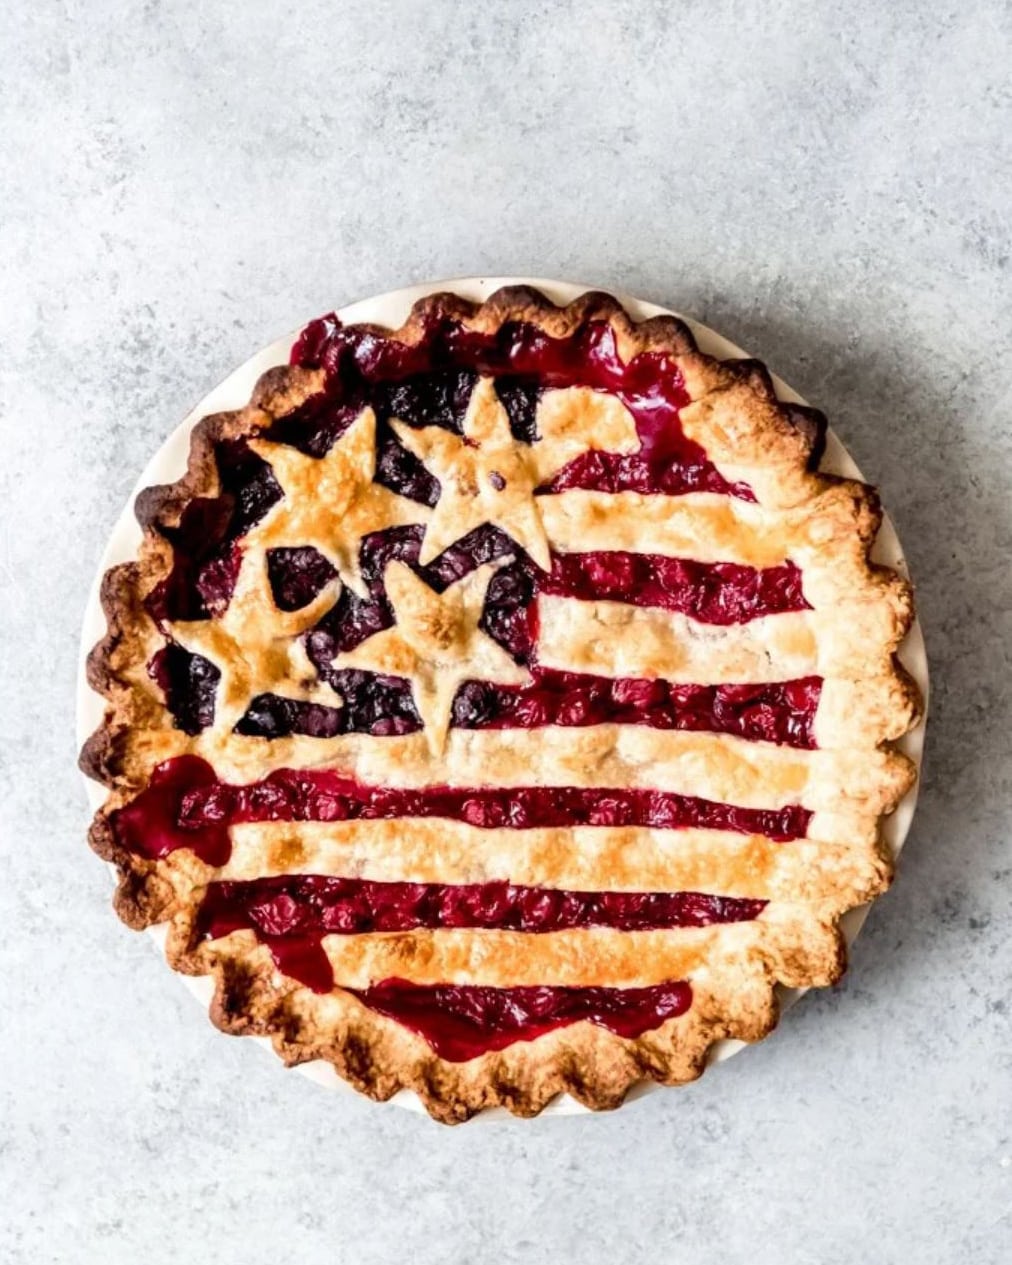 A pie decorated with red and blue berries, and stars and striped pie crust to look like the American flag.